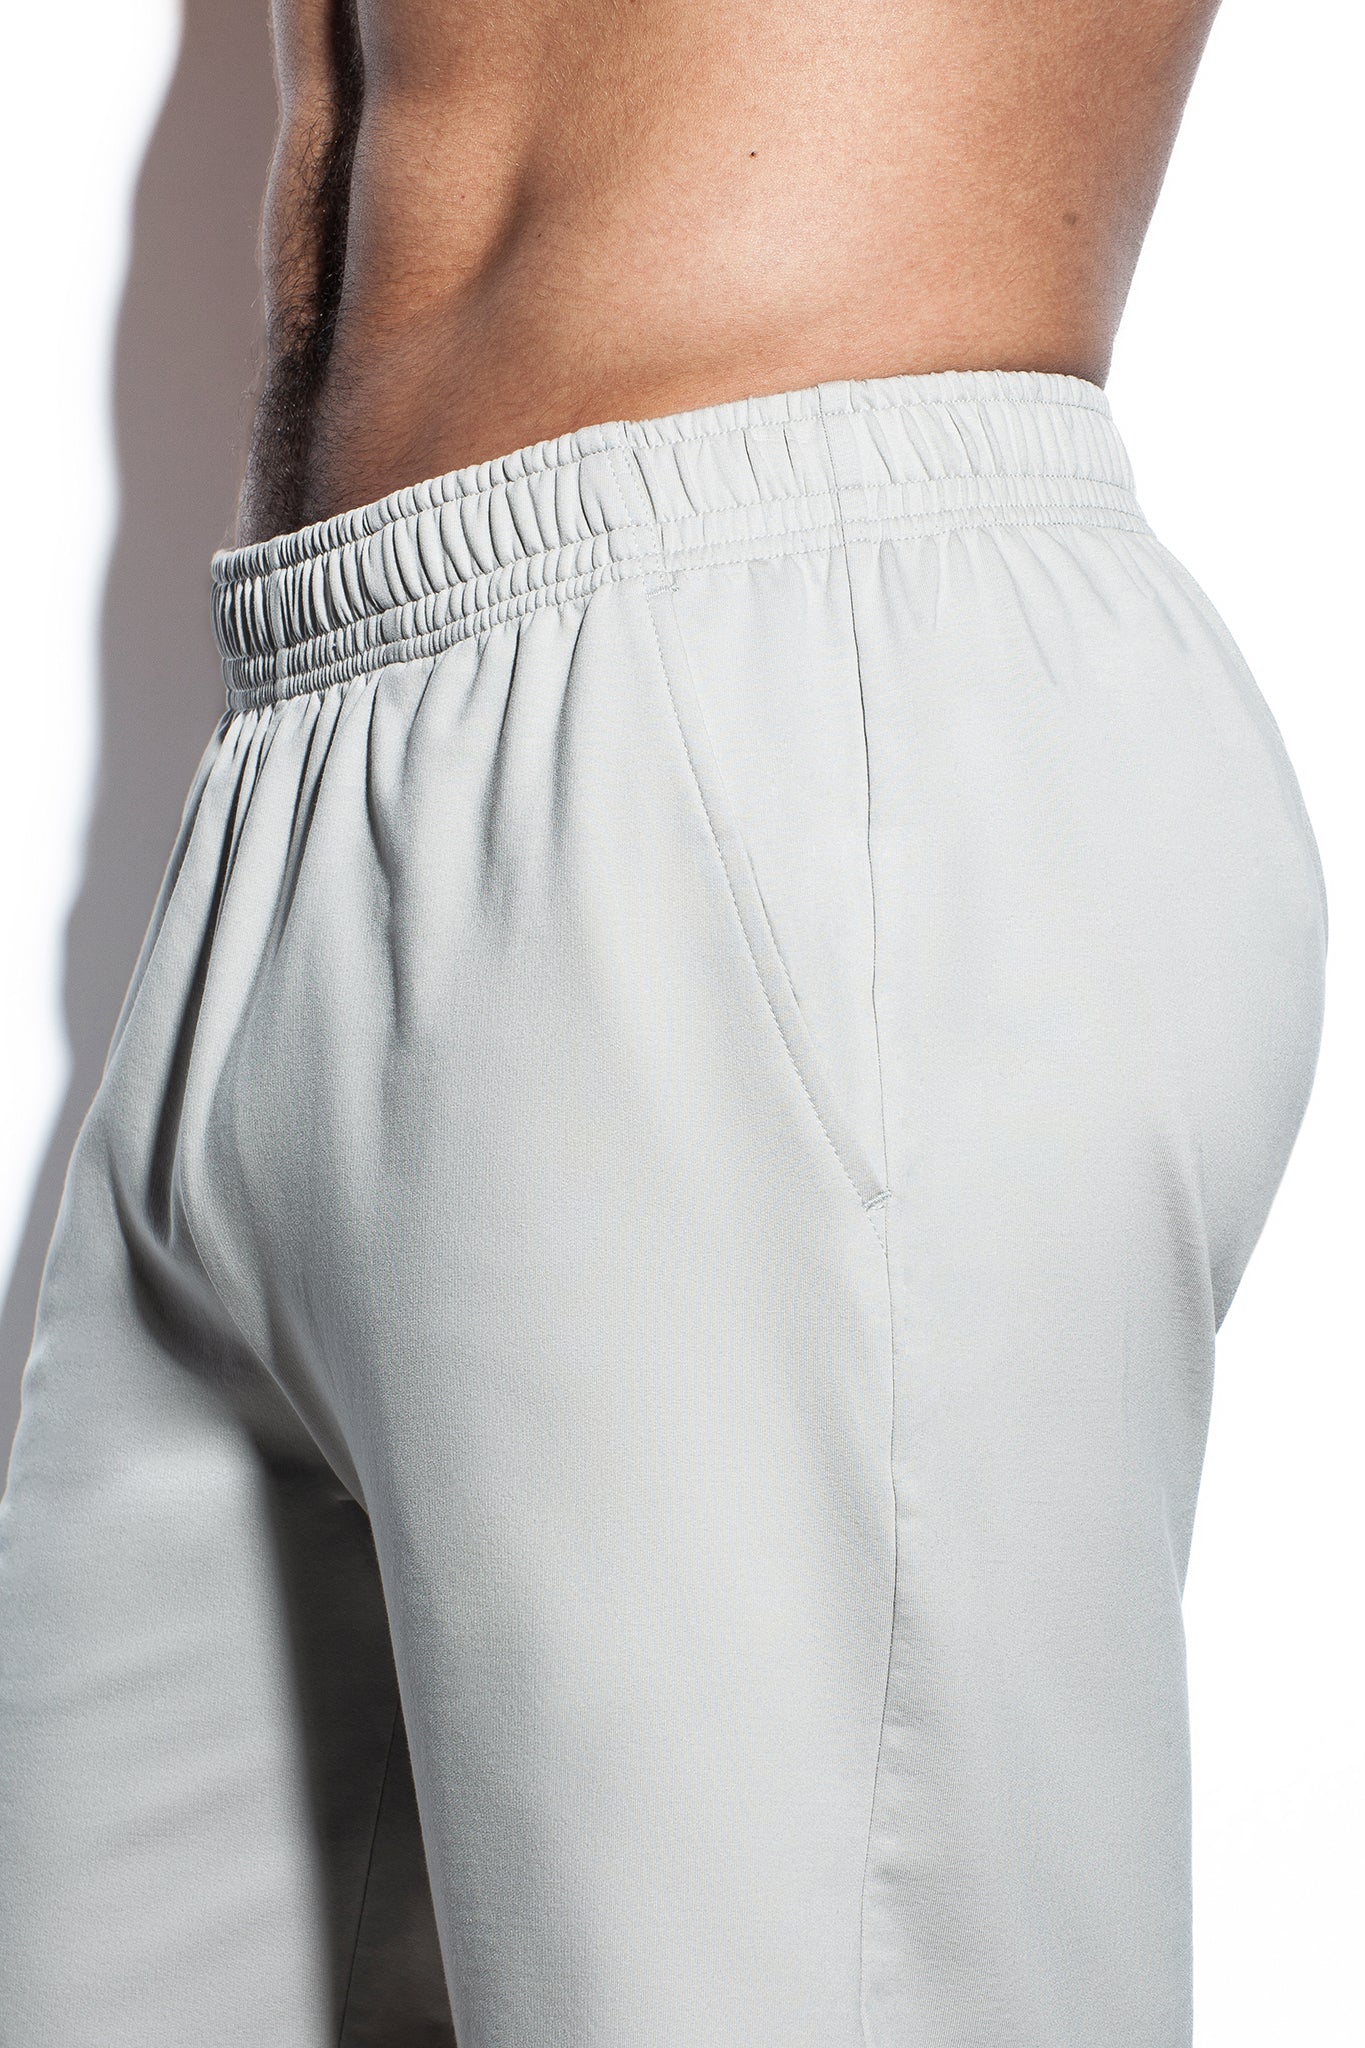 LOOSE GRAY FLEECY TOUCH SHORTS